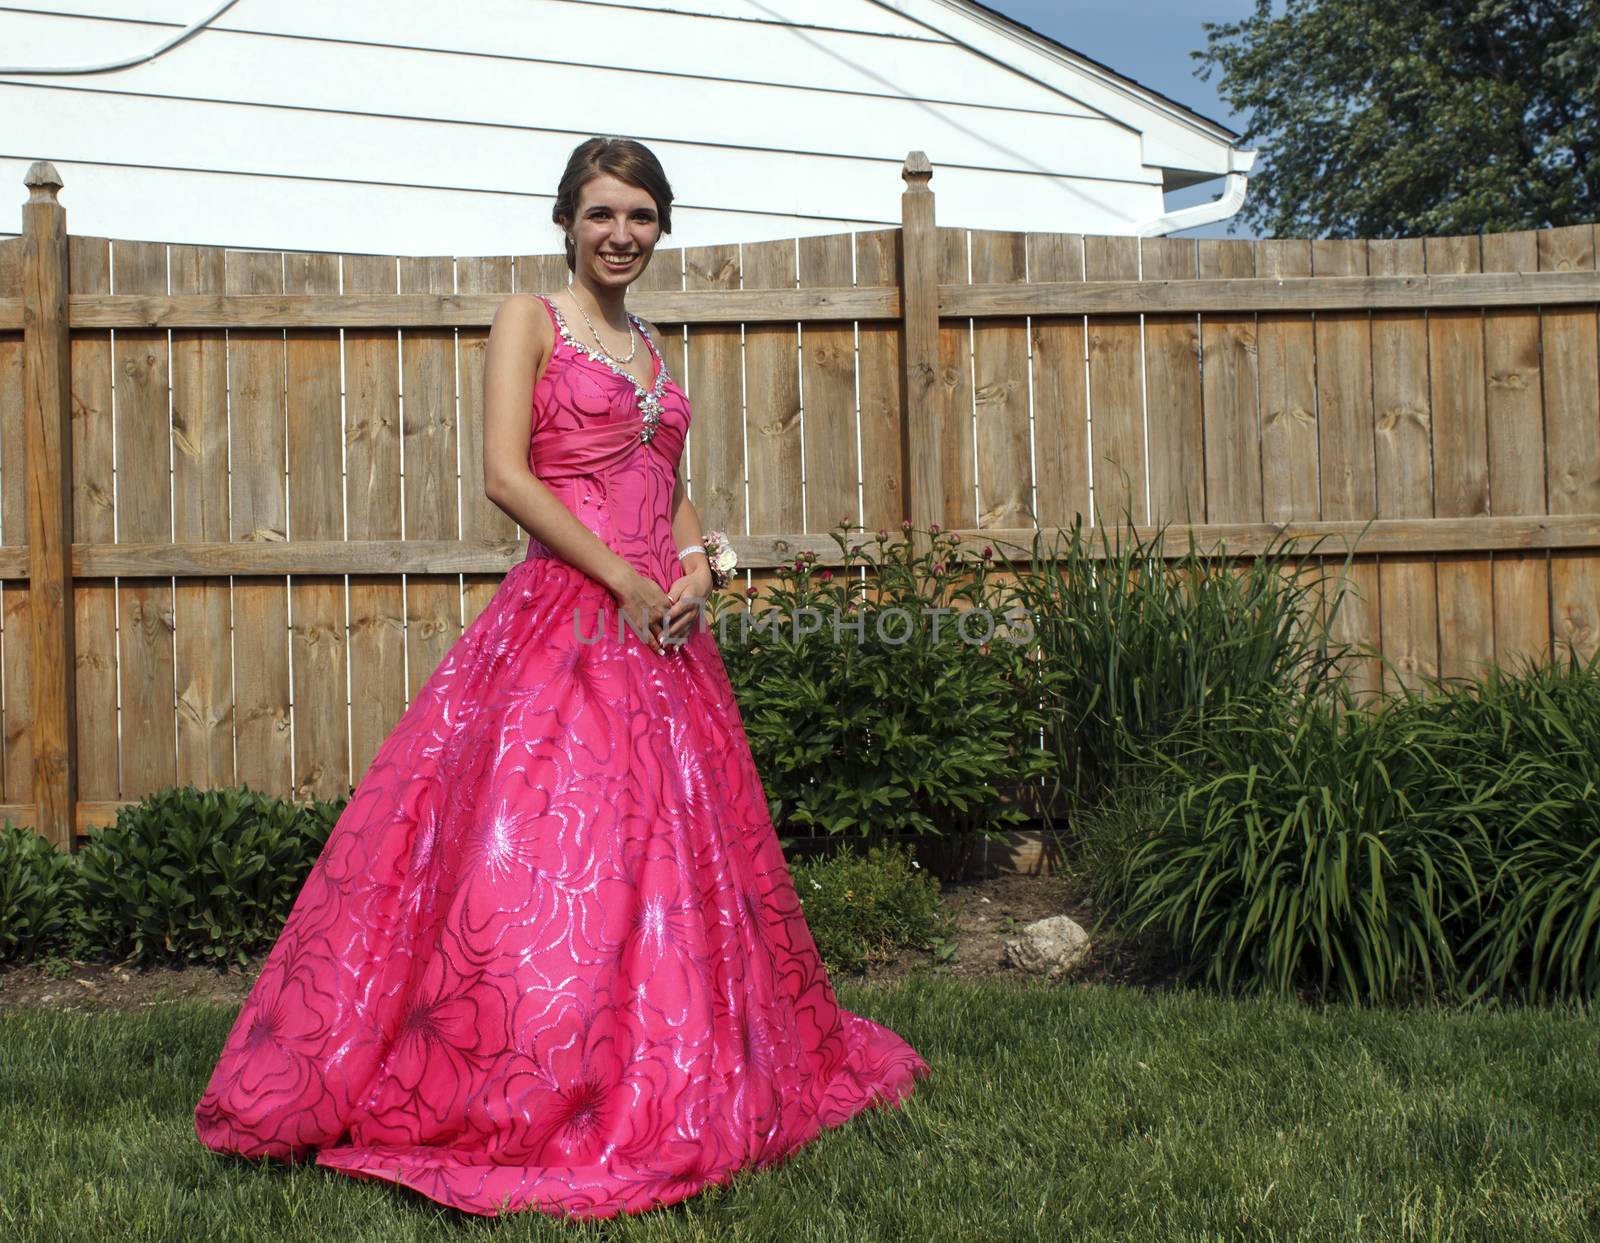 Girl poses outside in her beautiful pink prom dress.